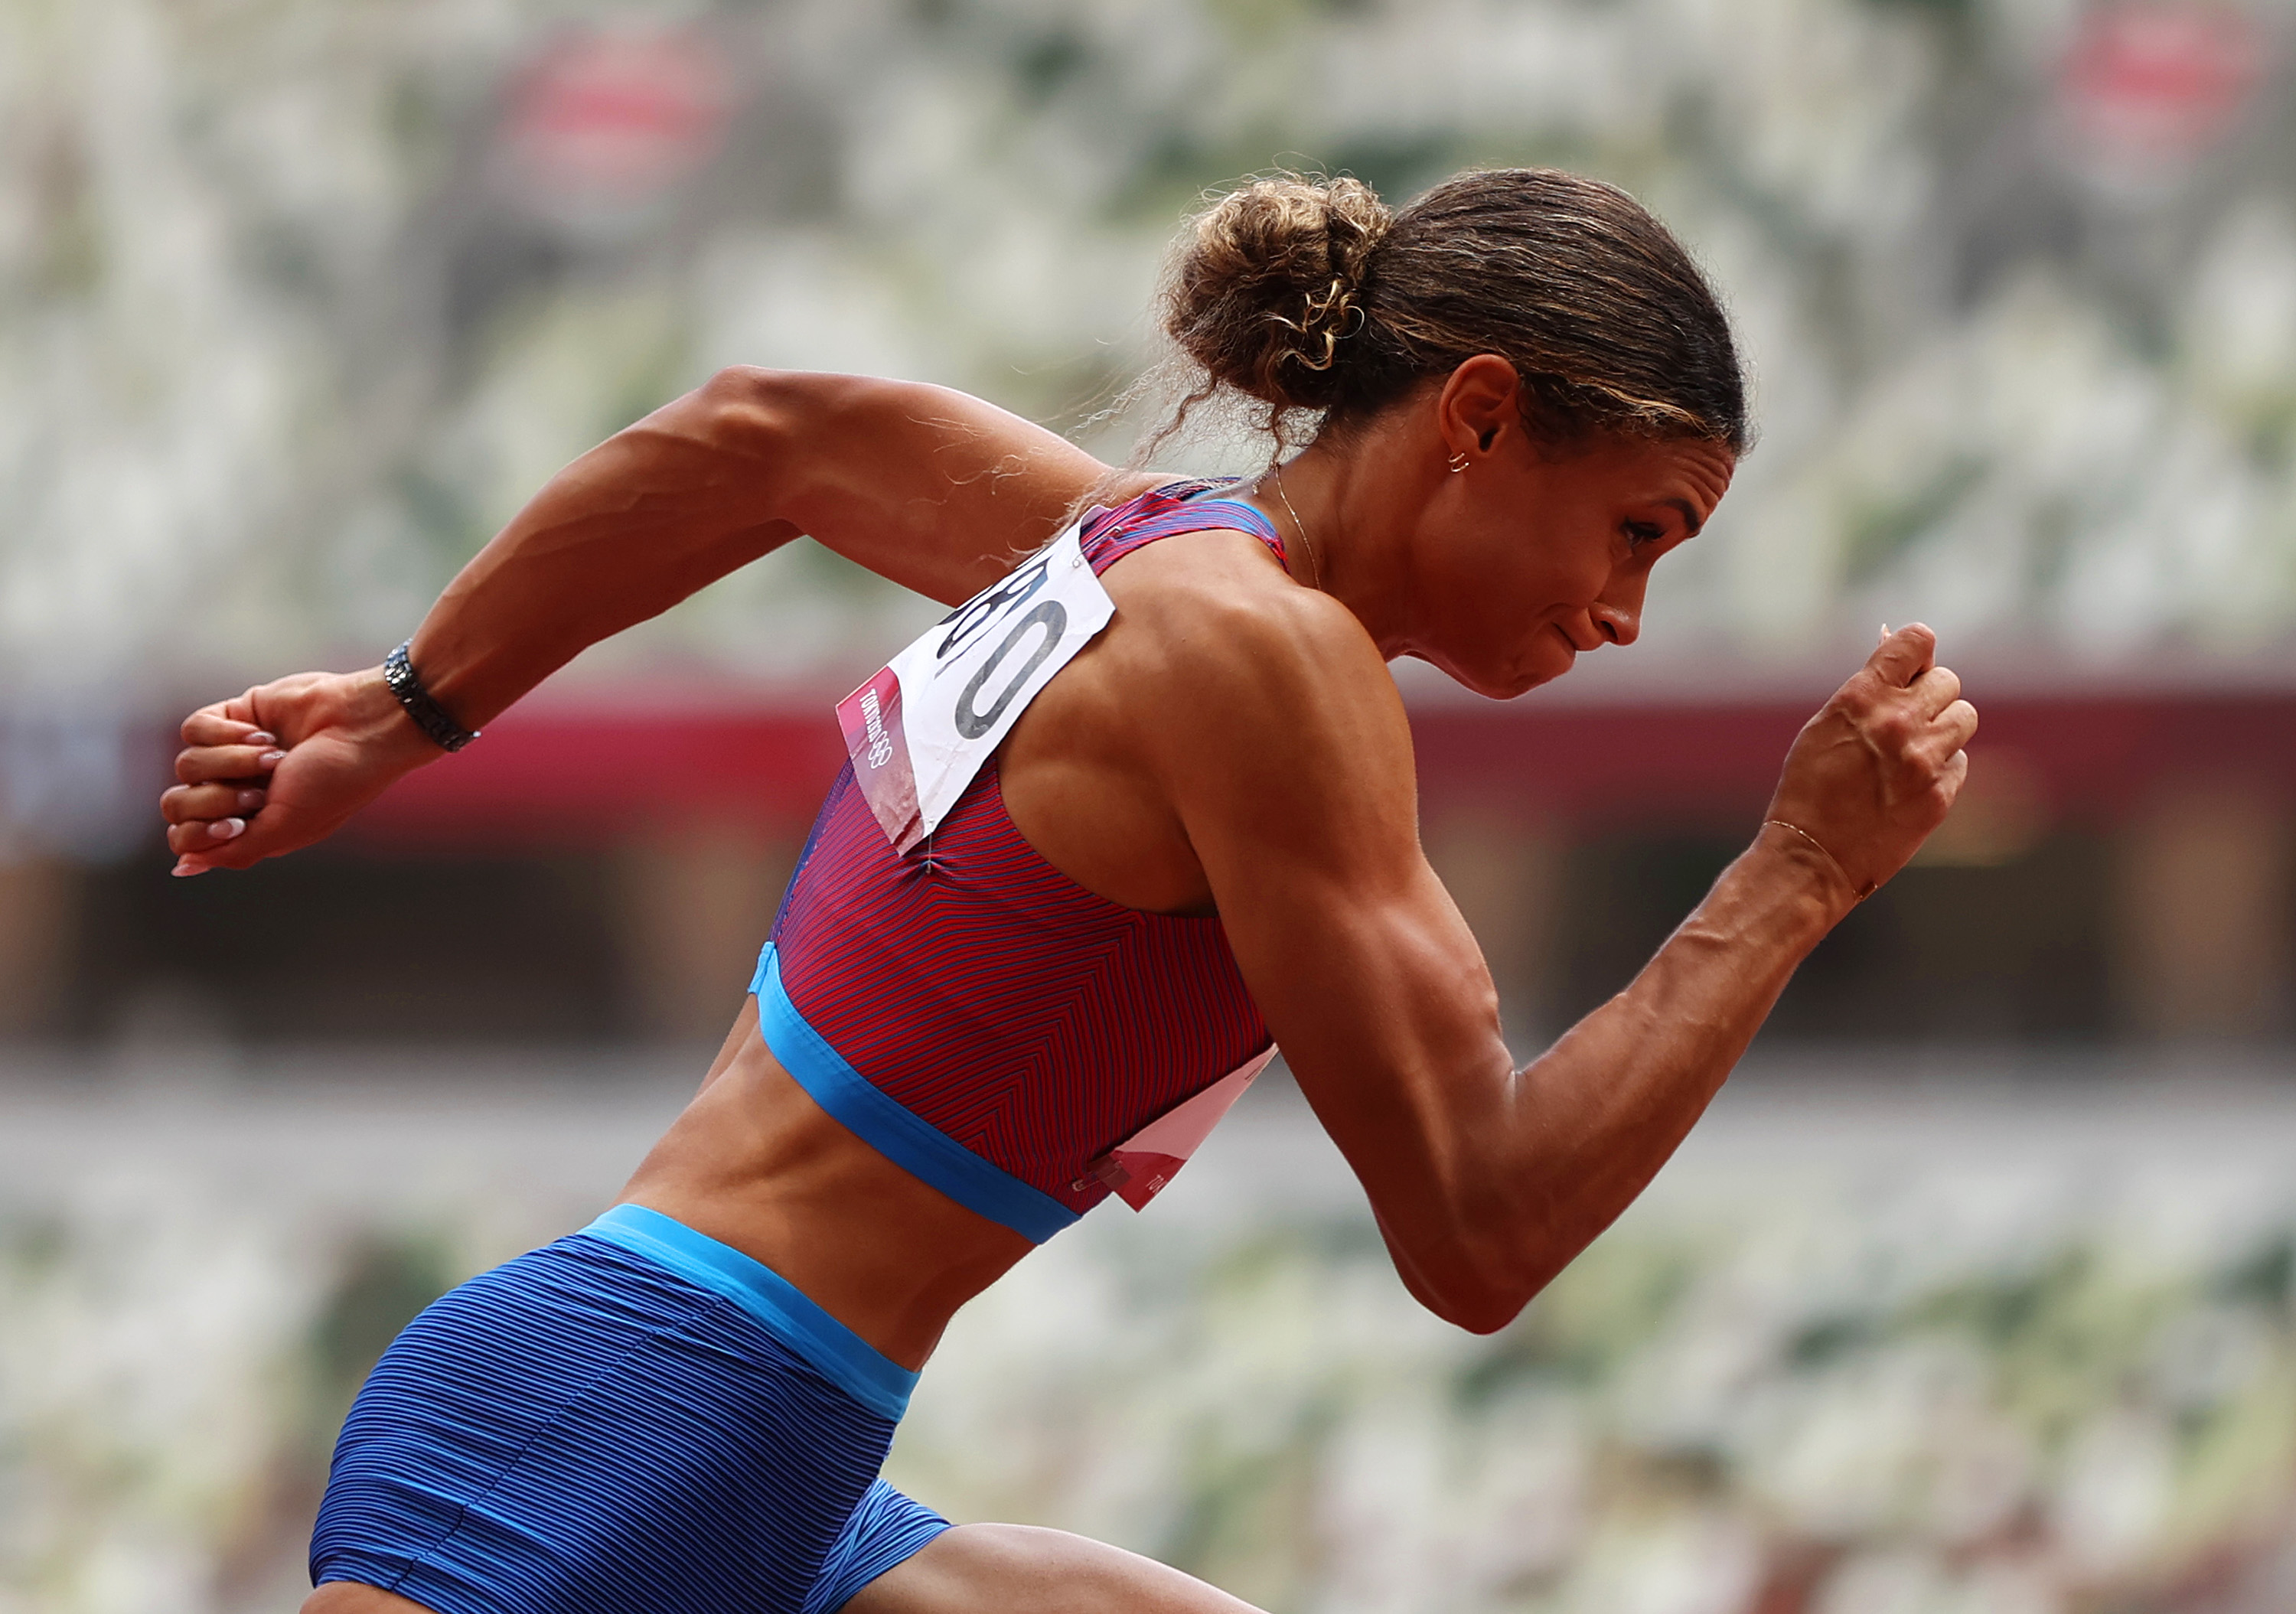 American Sydney McLaughlin competes in the women's 400 meter hurdles final on Wednesday.